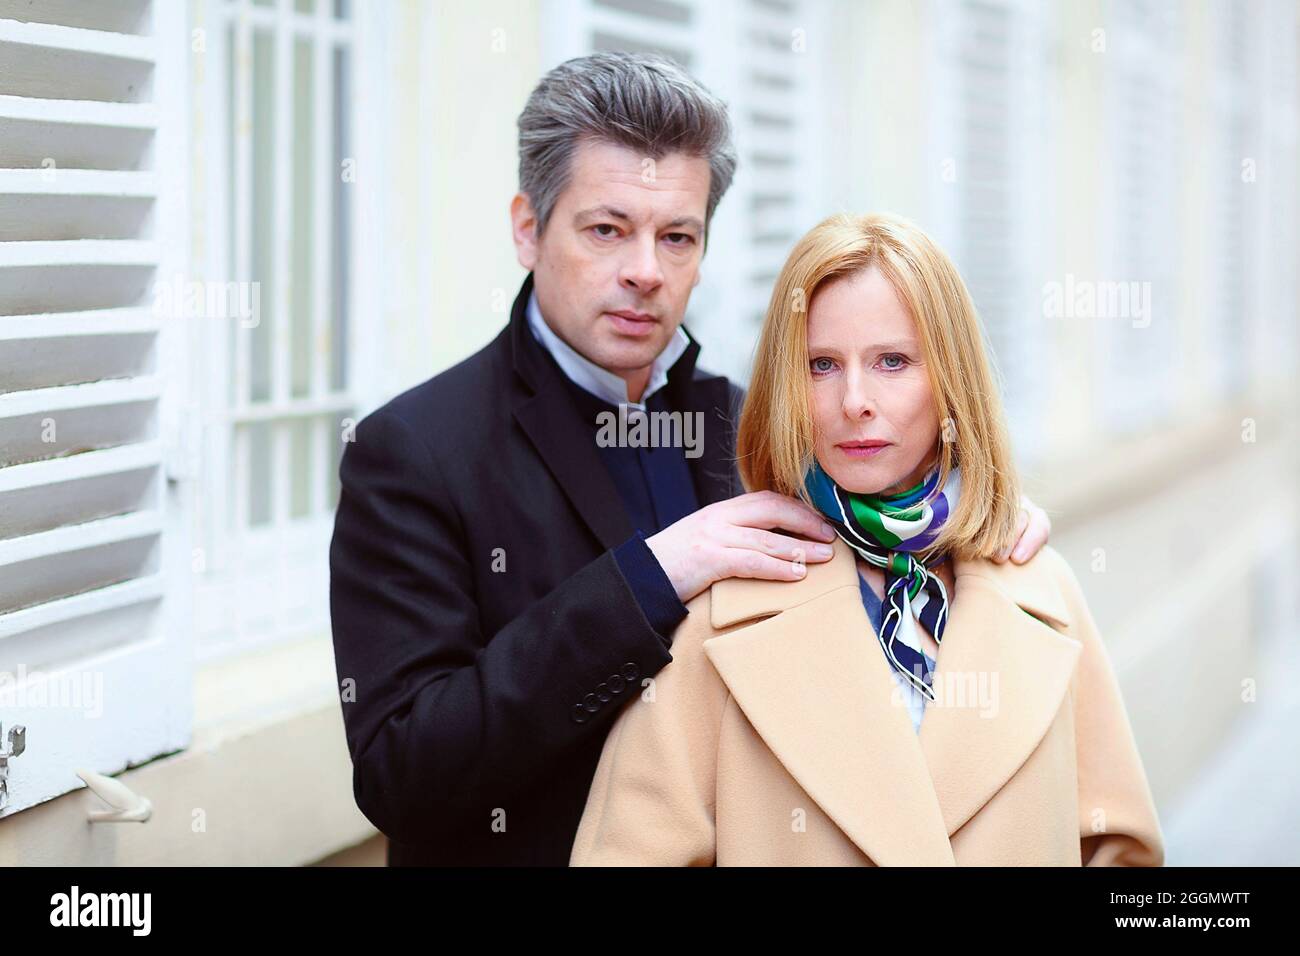 KARIN VIARD and BENJAMIN BIOLAY in APPEARANCES (2020) -Original title: LES APPARENCES-, directed by MARC FITOUSSI. Credit: Thelma Films / Scope Pictures / Album Stock Photo